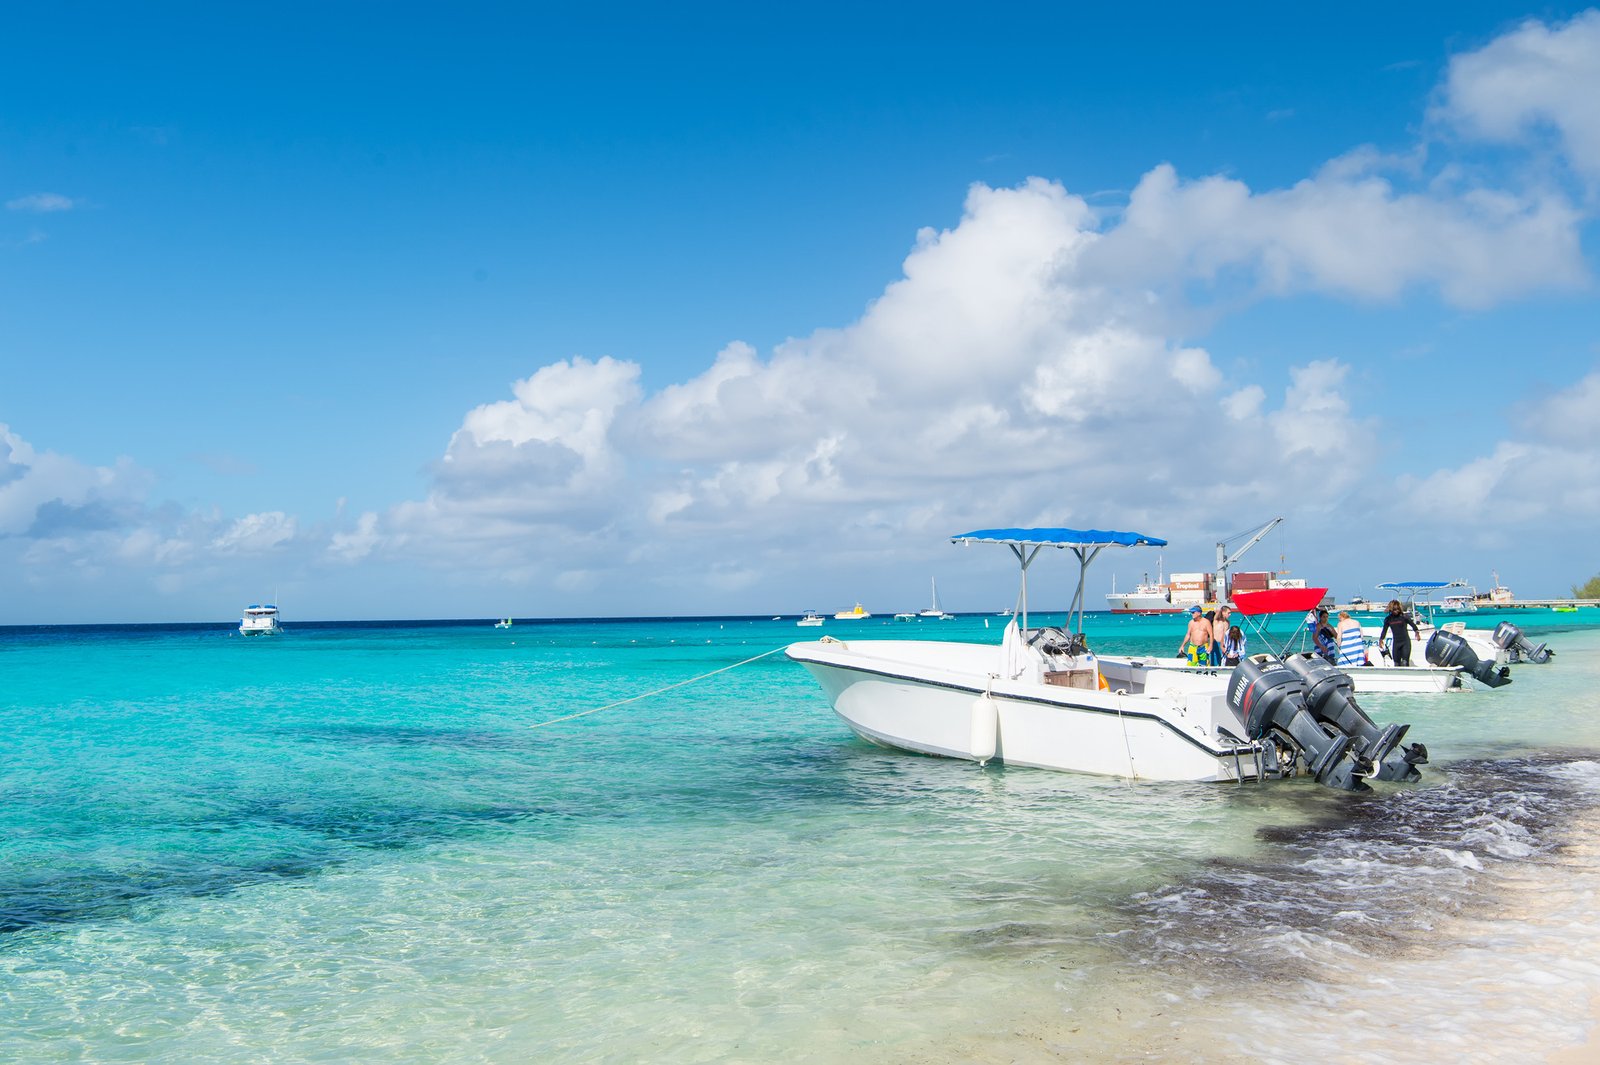 Grand Turk, Turks and Caicos Islands - December 29, 2015: motor boats and people on sea beach. Powerboats on sunny seascape. Travel on boat, water transport. Summer vacation on tropical island.